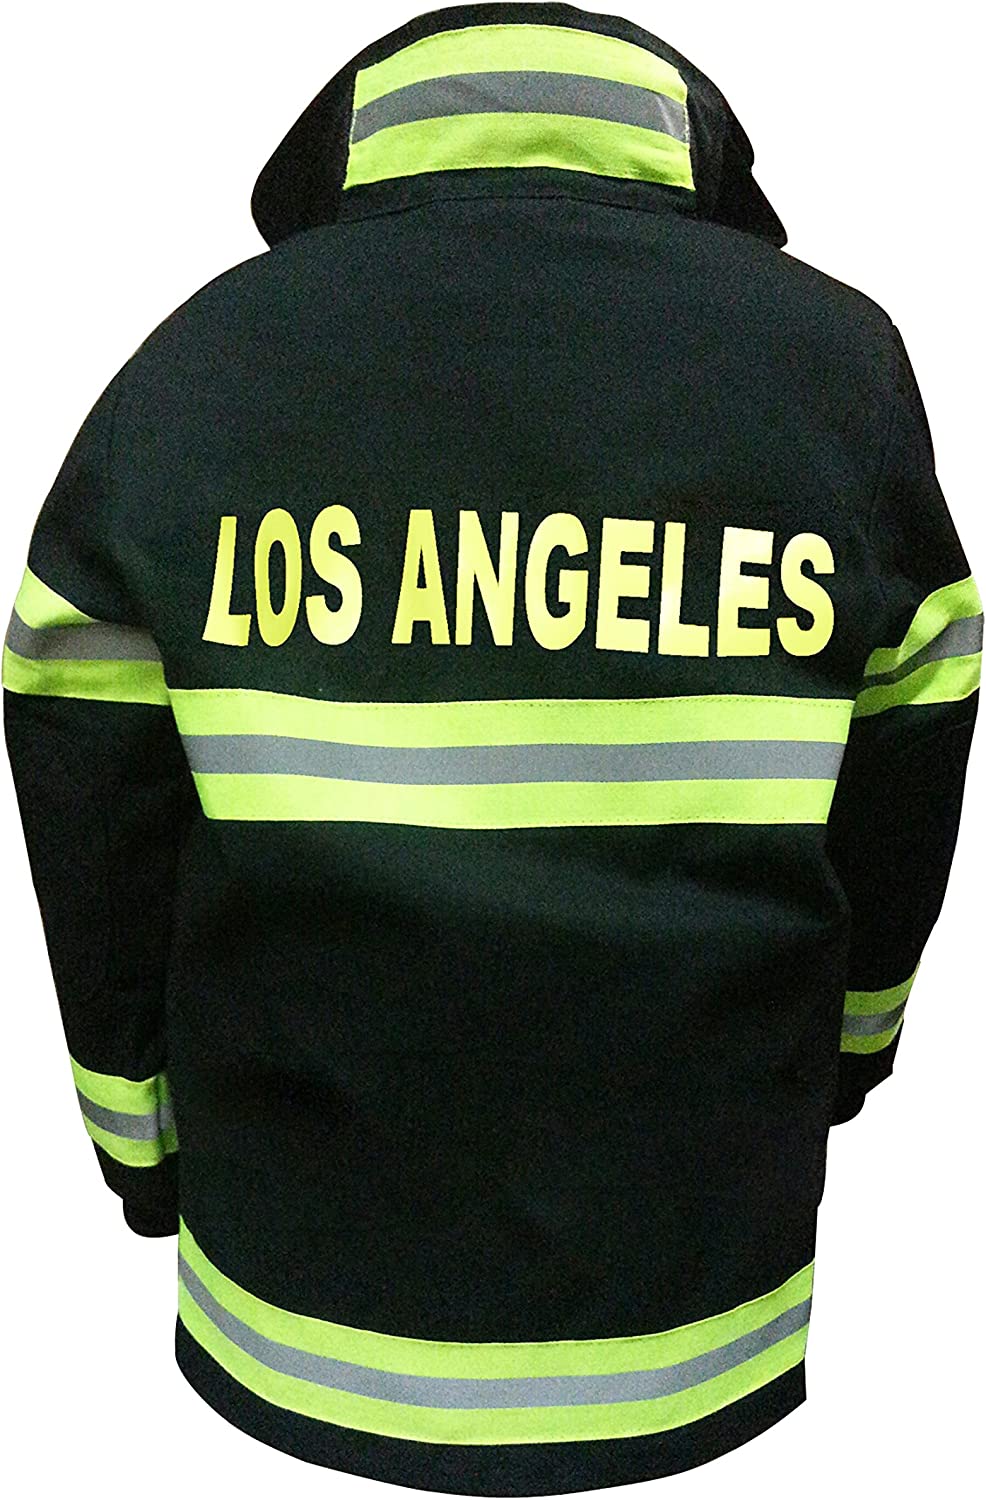 Aeromax Jr. LOS ANGELES Fire Fighter Suit, Black, Size 8/10. The best #1 - Award Winning firefighter suit. The most realistic bunker gear for kids everywhere. Just like the real gear!